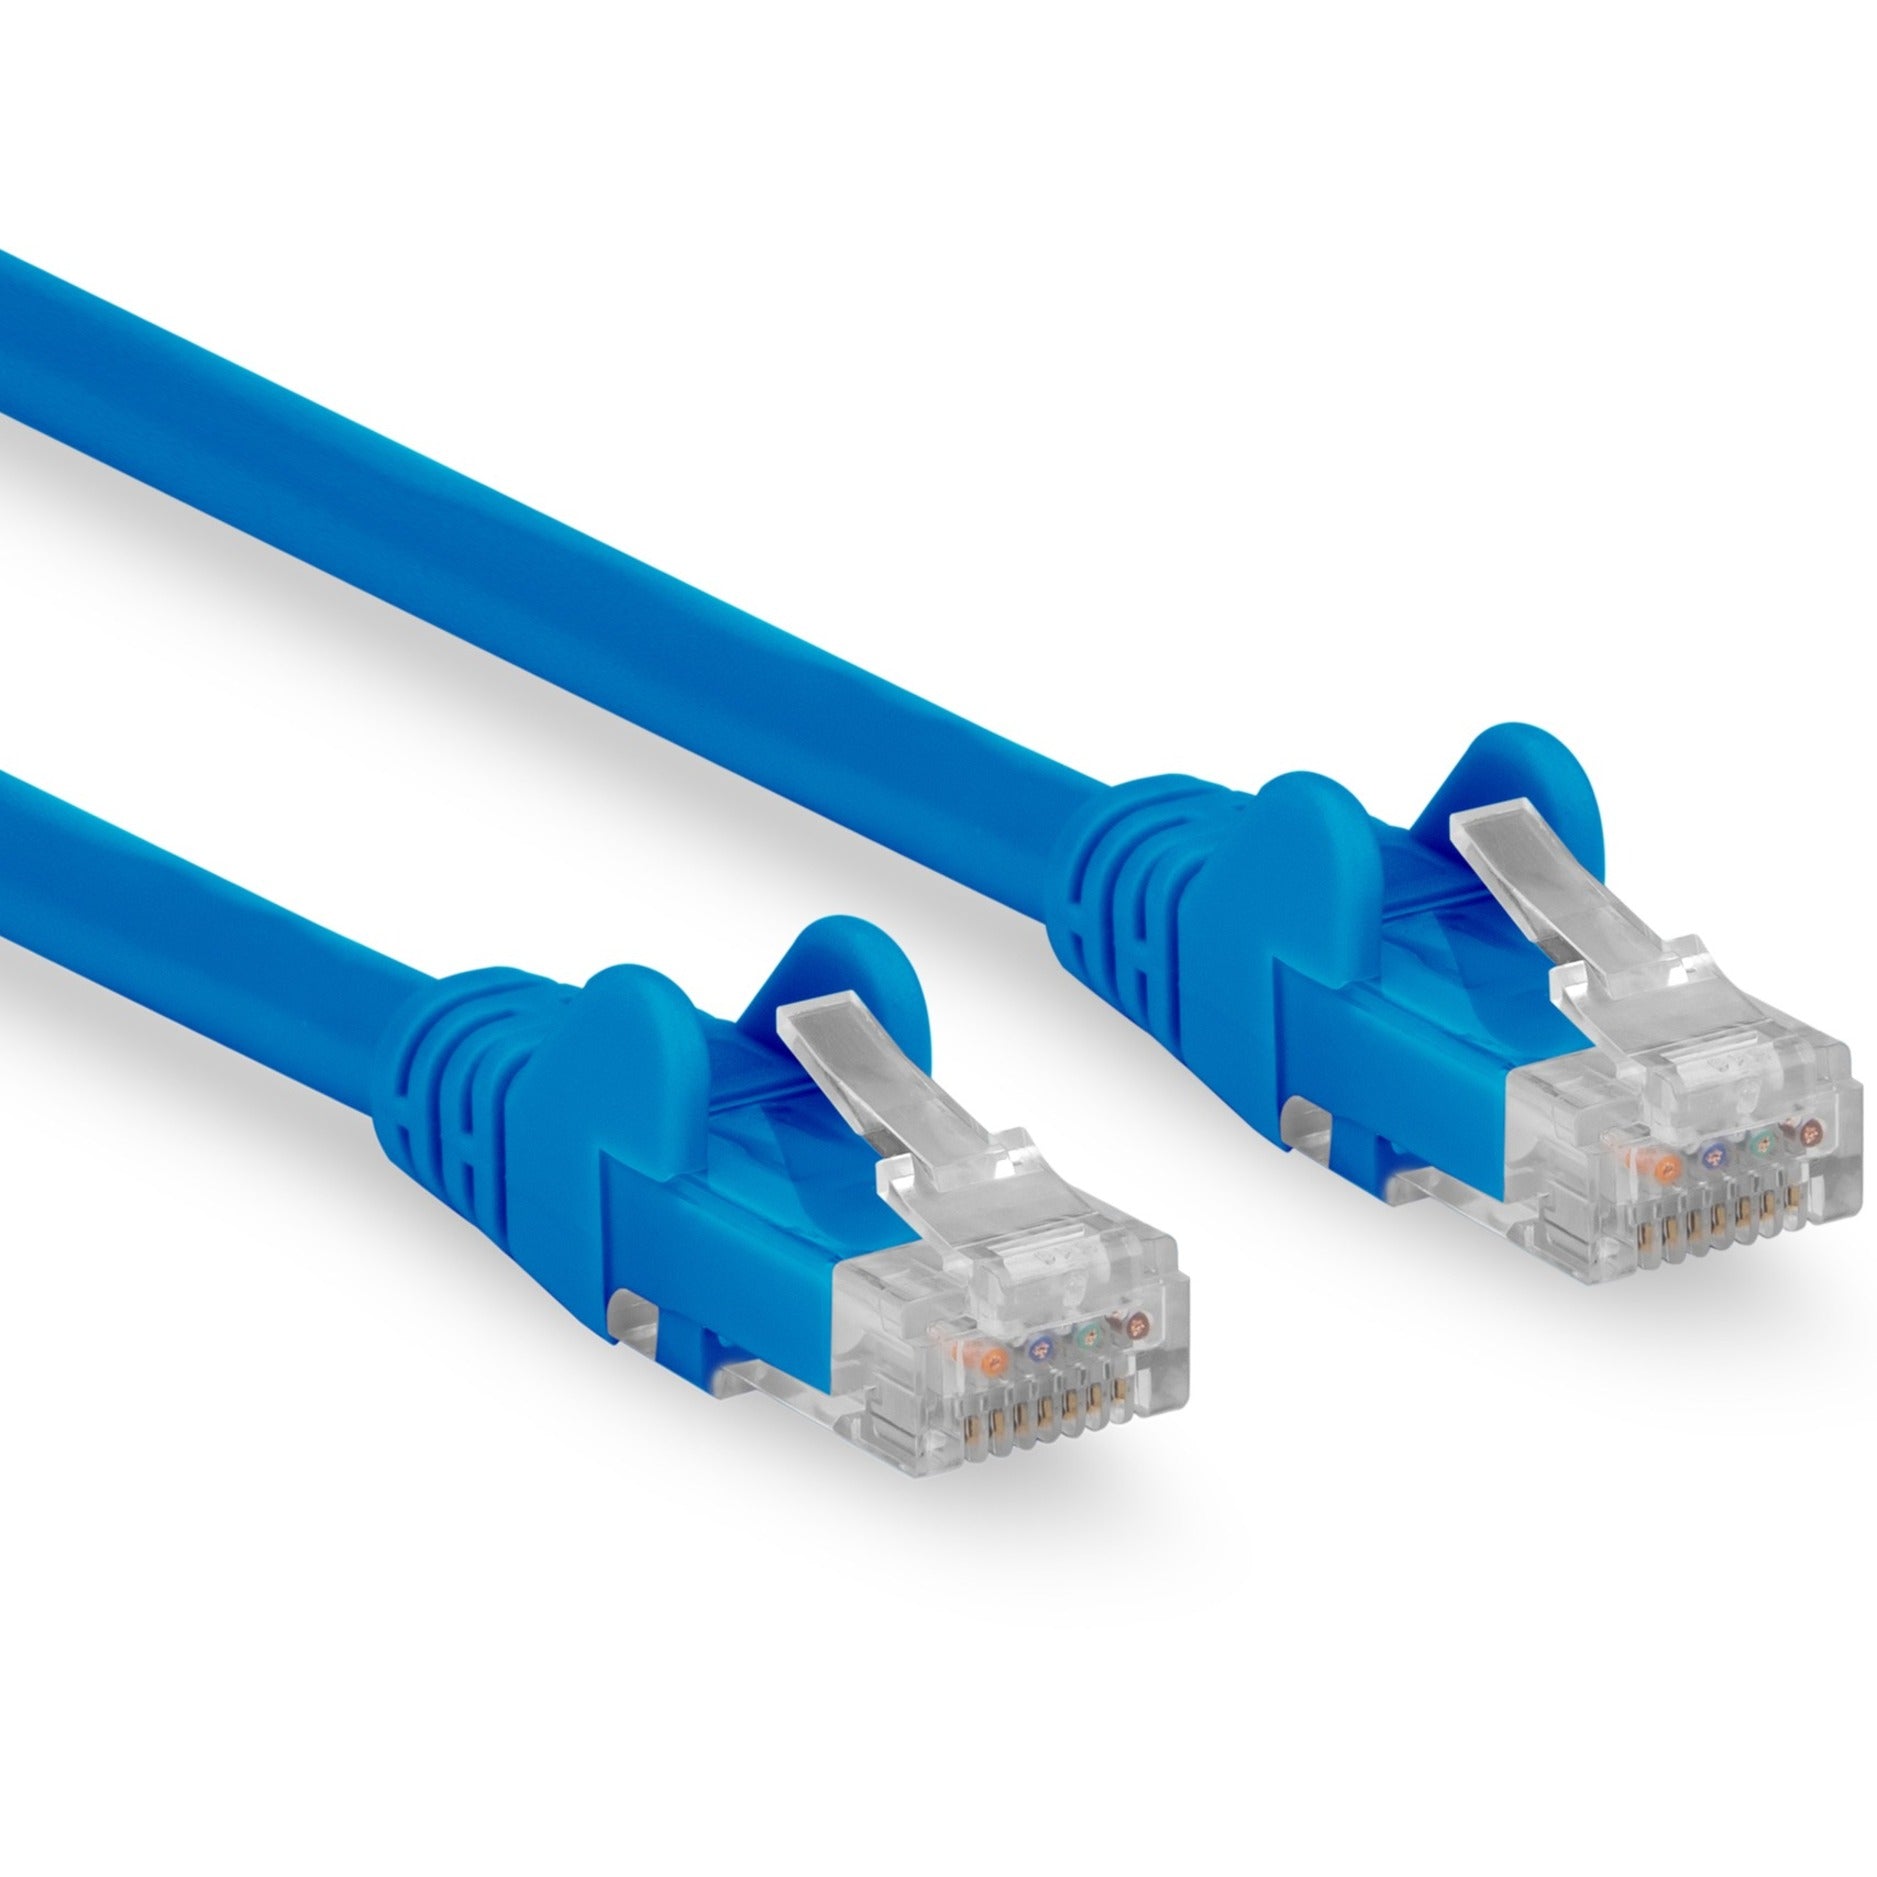 Rocstor Y10C298-BL Cat.6 Network Cable, 6" Patch Cable, 10 Gbit/s, Snagless Boot, Lifetime Warranty